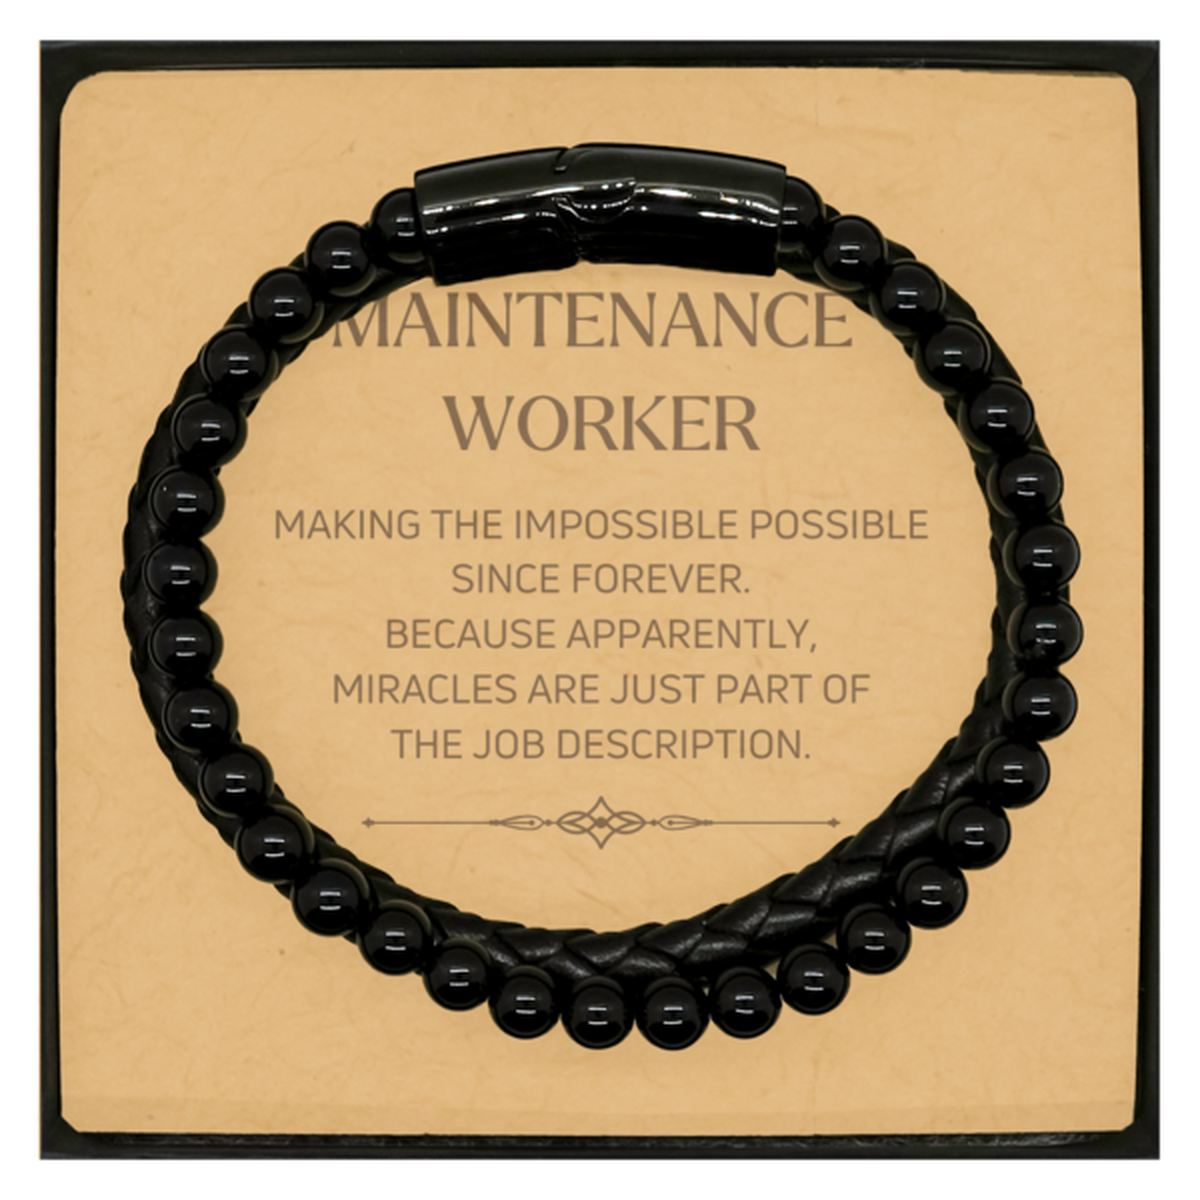 Funny Maintenance Worker Gifts, Miracles are just part of the job description, Inspirational Birthday Christmas Stone Leather Bracelets For Maintenance Worker, Men, Women, Coworkers, Friends, Boss